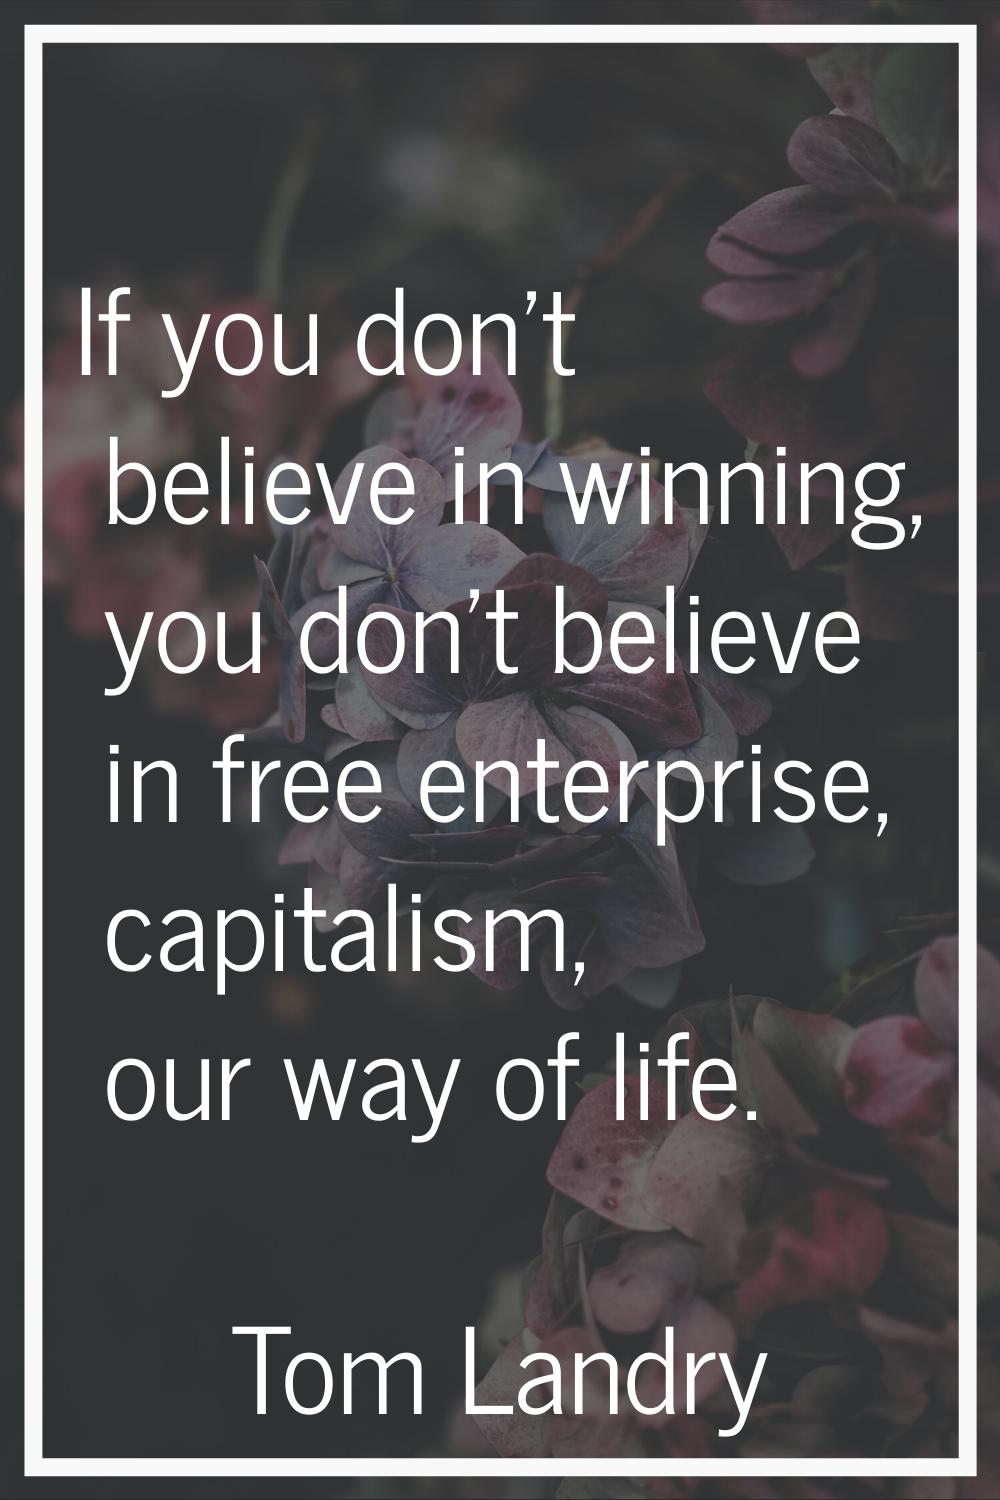 If you don't believe in winning, you don't believe in free enterprise, capitalism, our way of life.